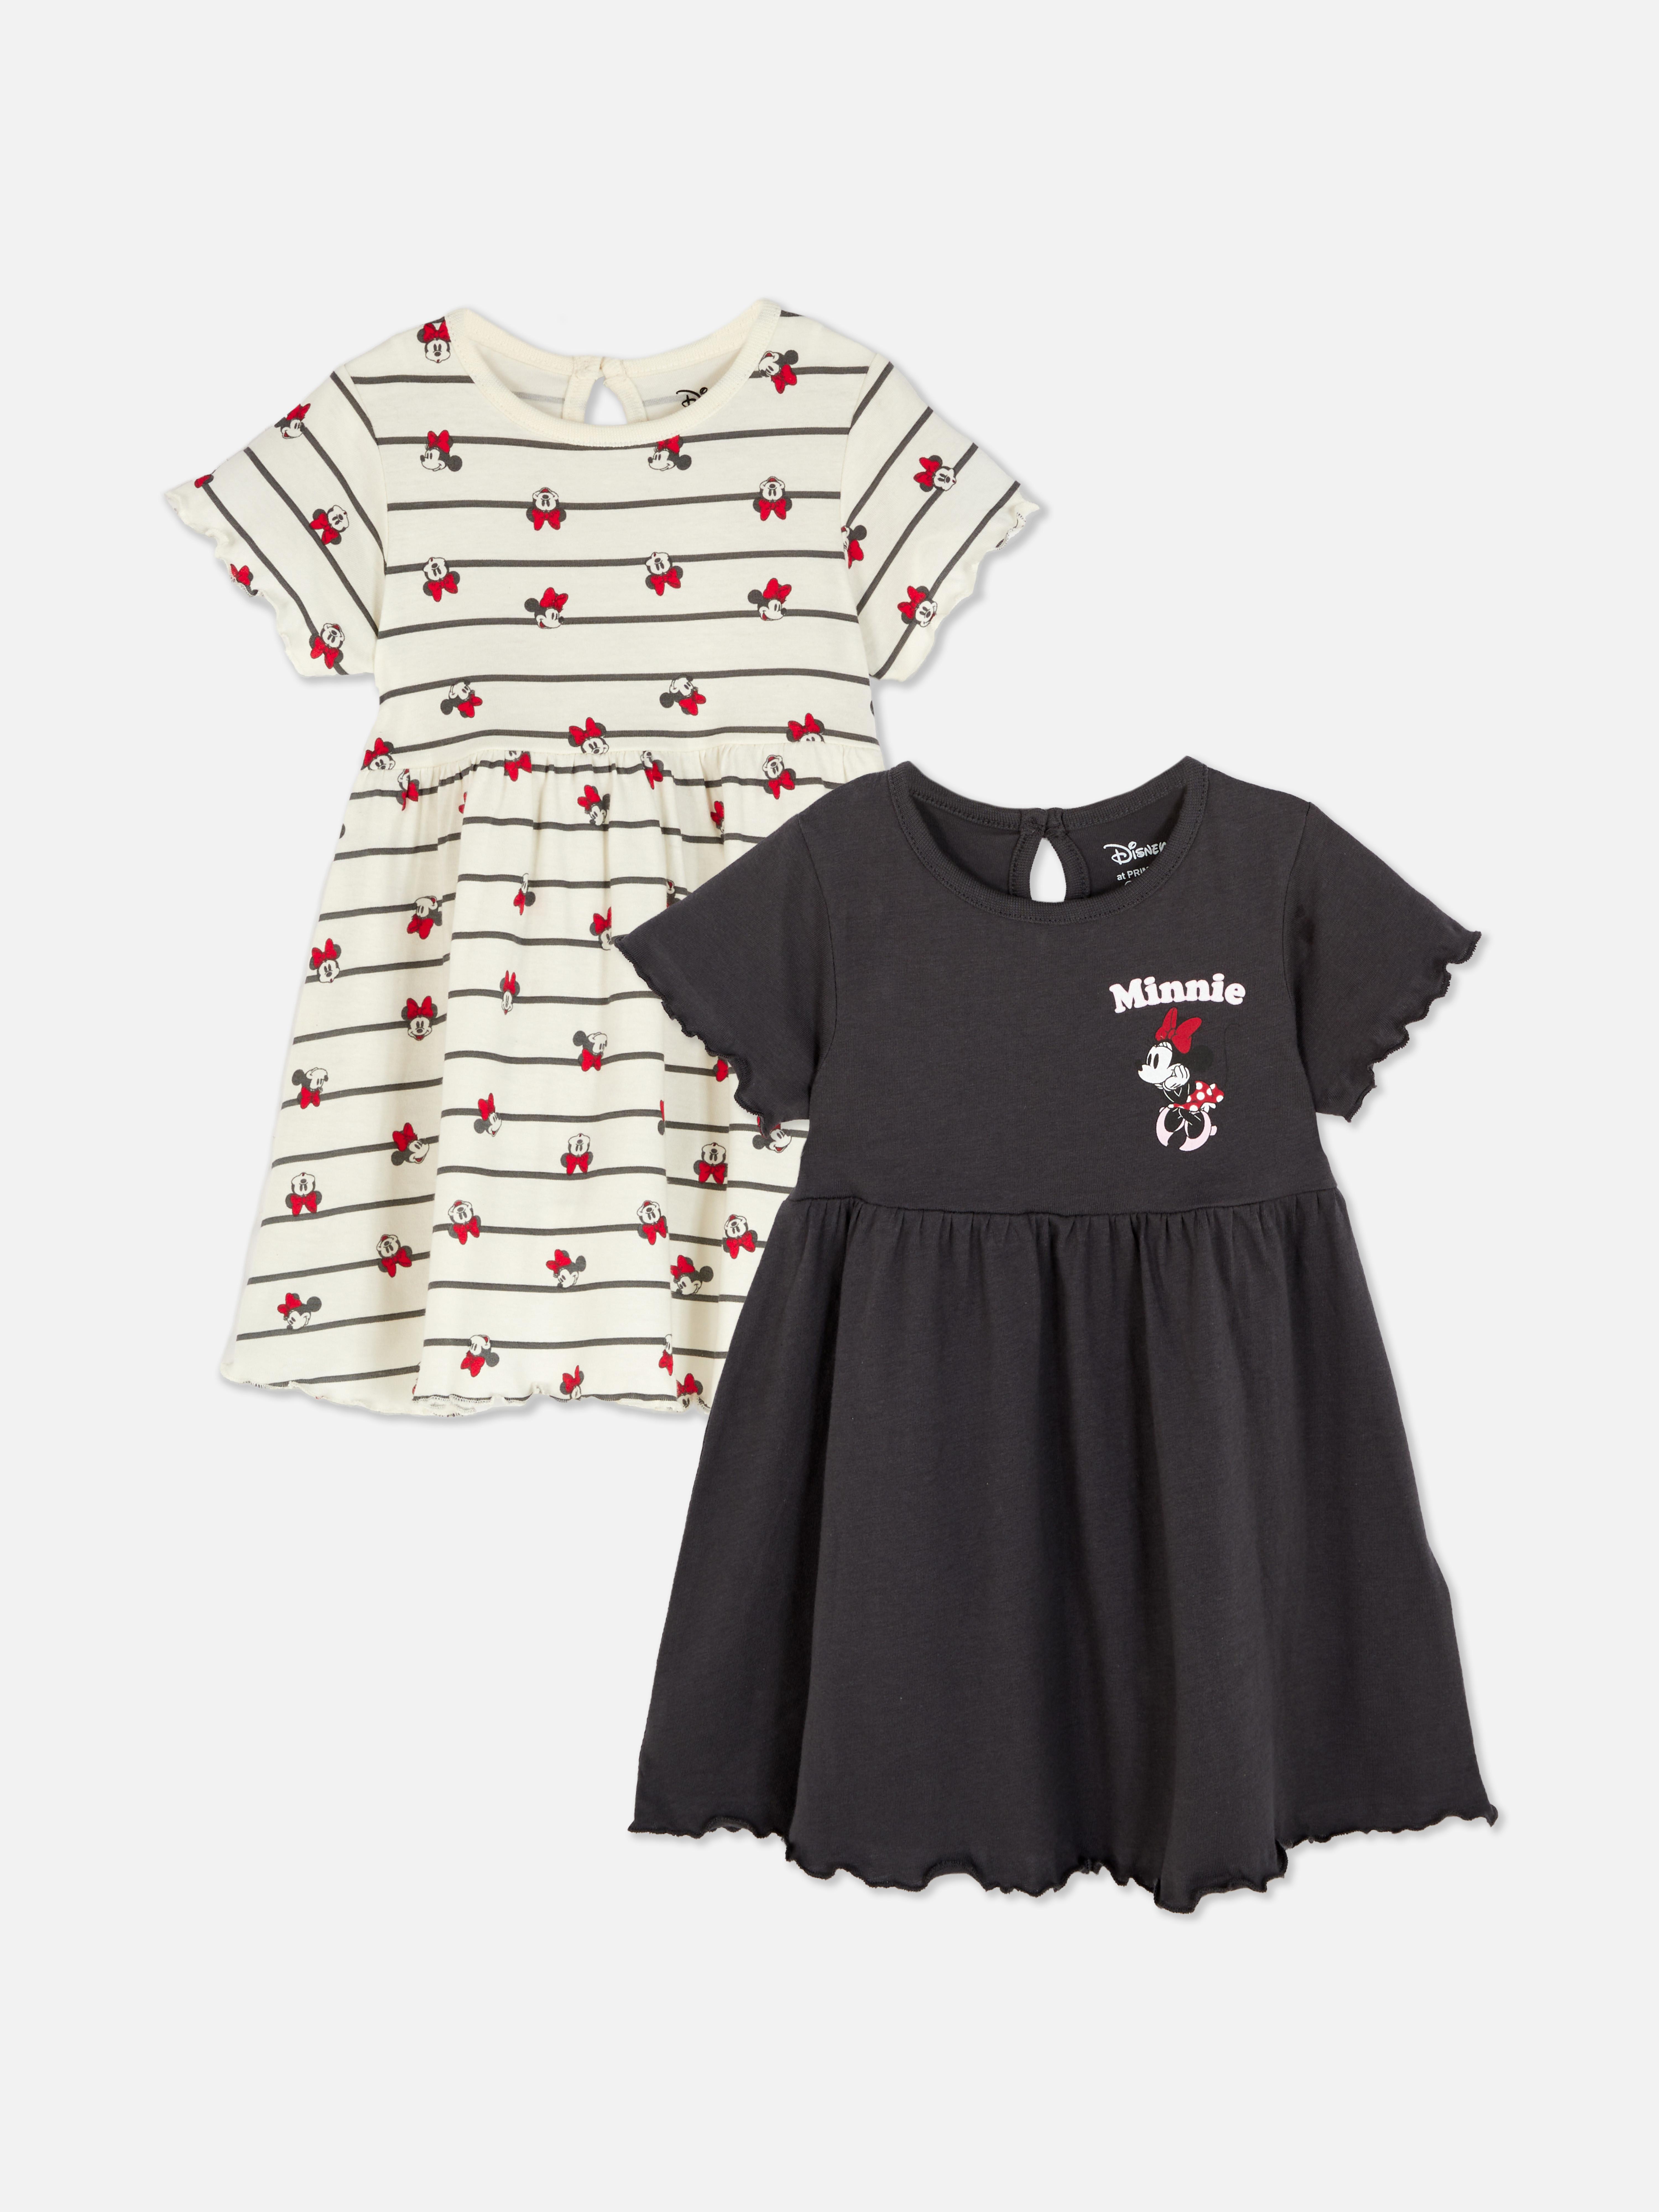 2-Pack Disney’s Minnie Mouse Jersey Dresses